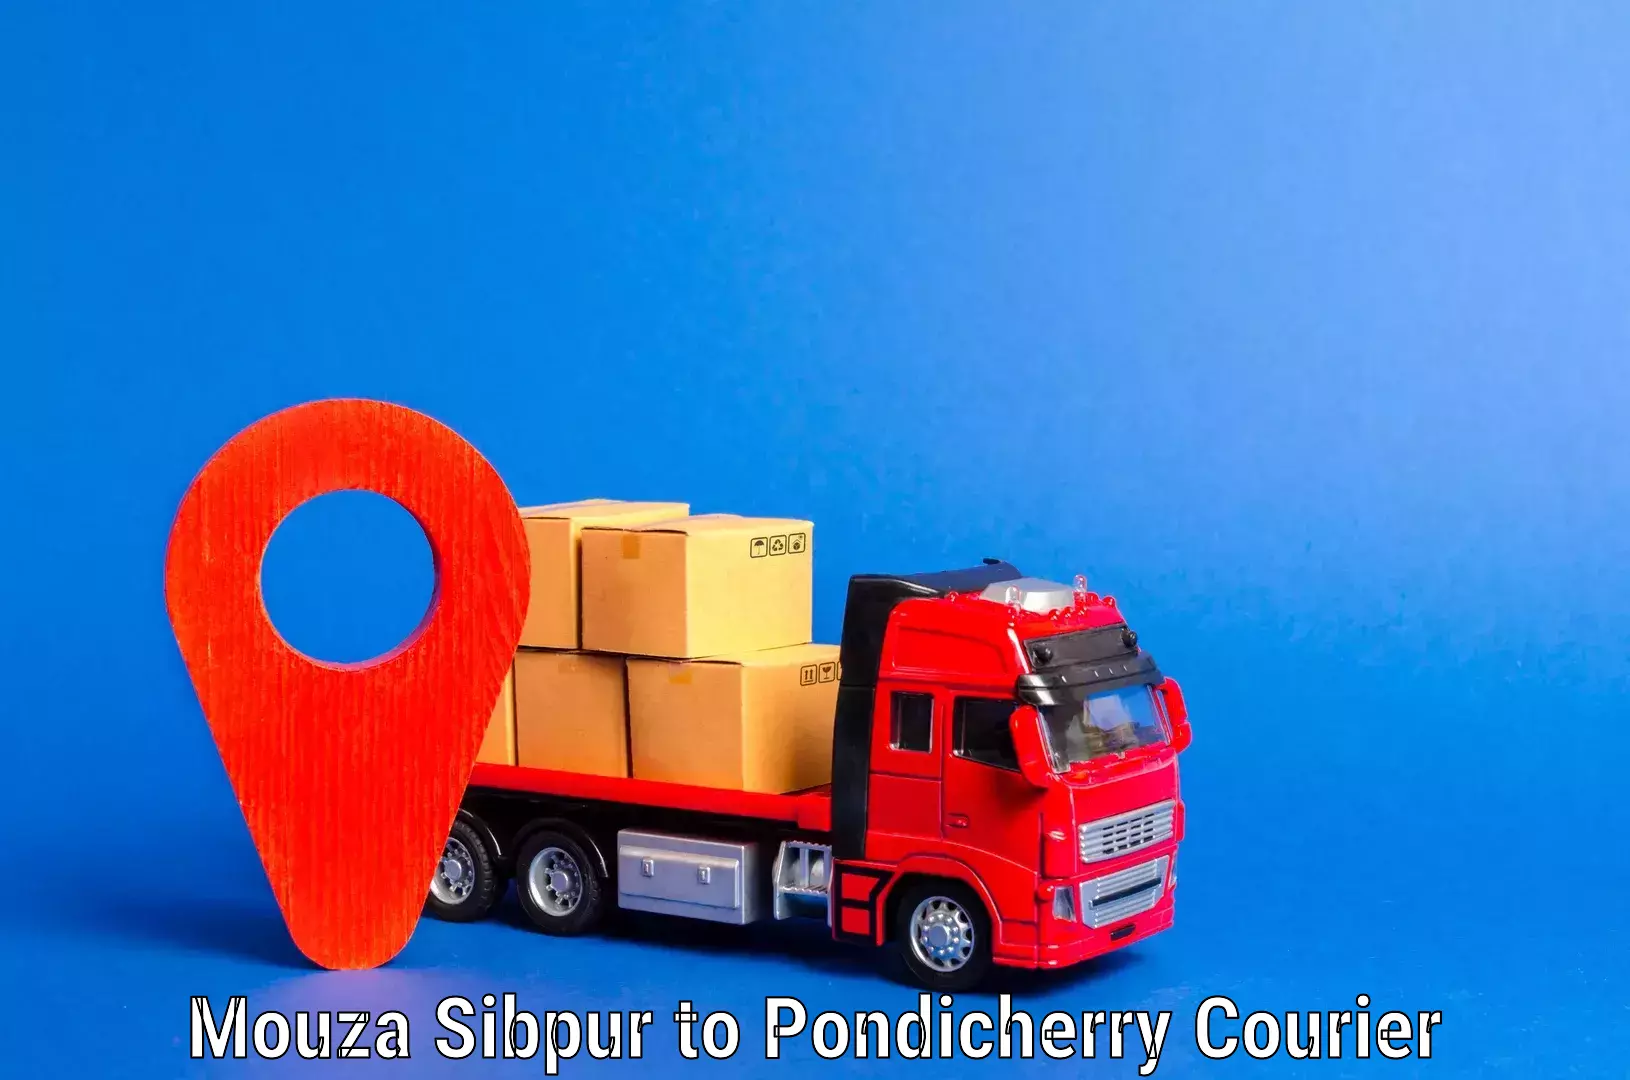 Professional packing services Mouza Sibpur to Pondicherry